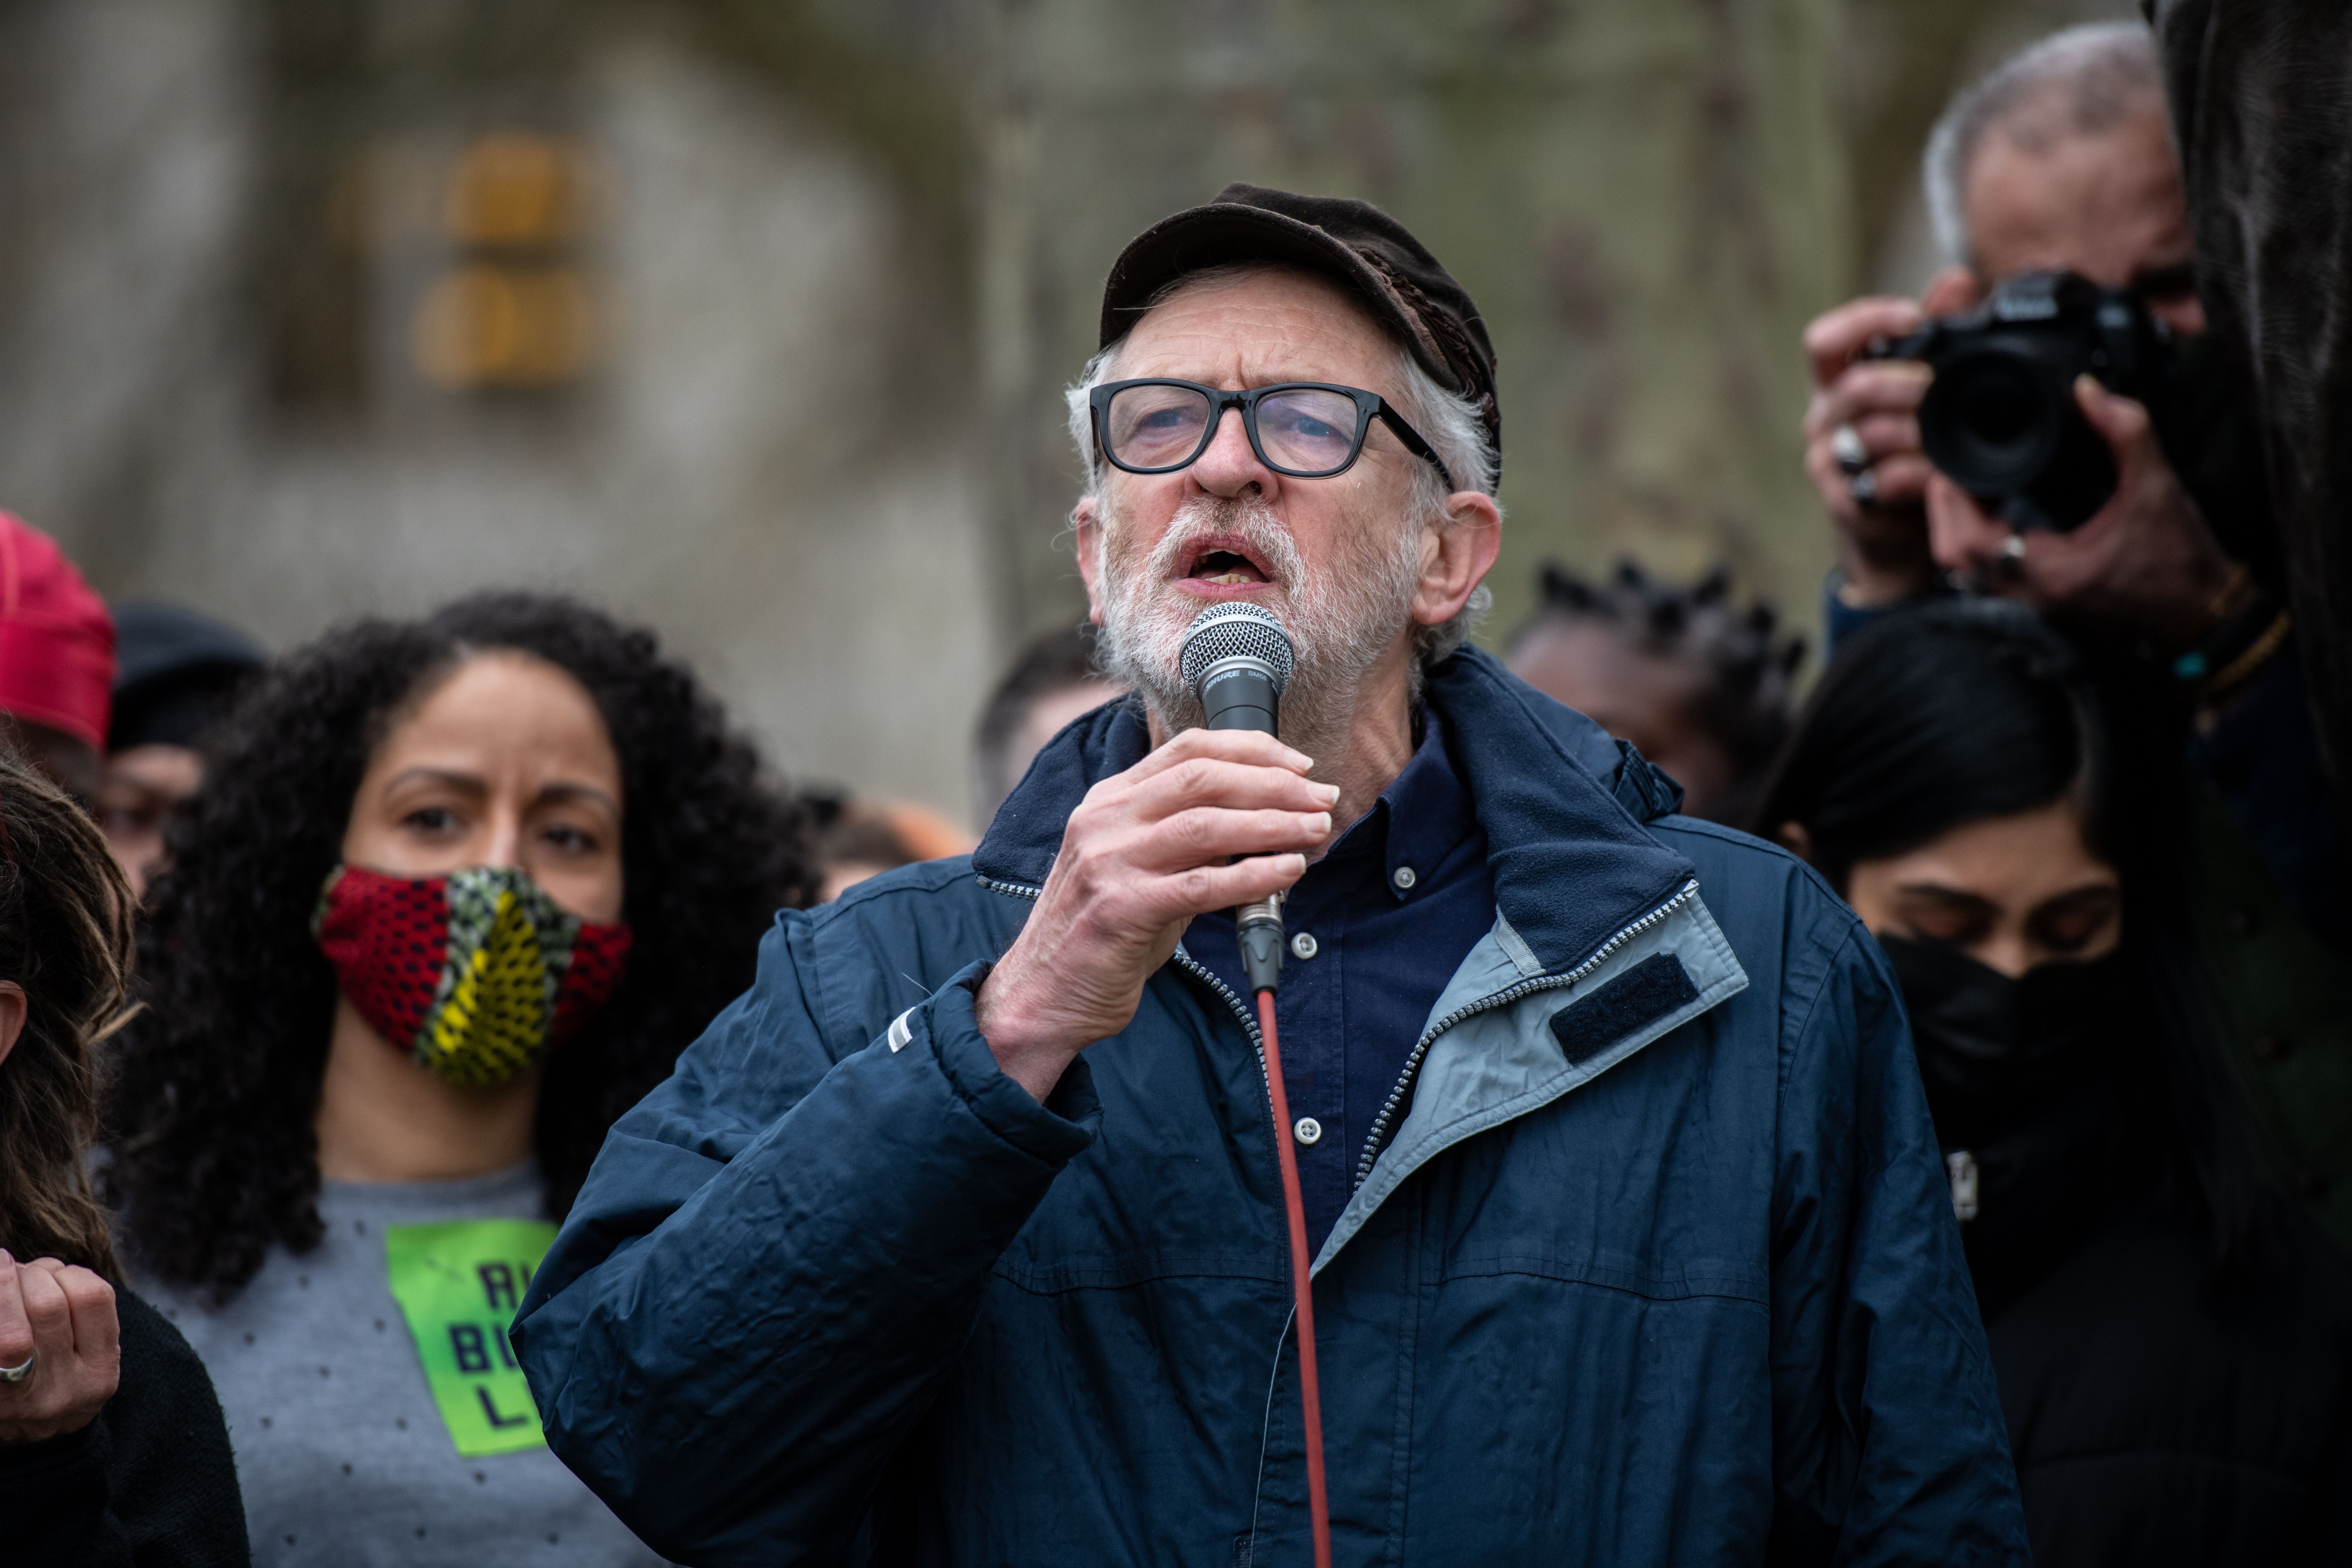 Former Labour Party Leader, Jeremy Corbyn, speaking during a "kill the bill" protest in London on April 3.